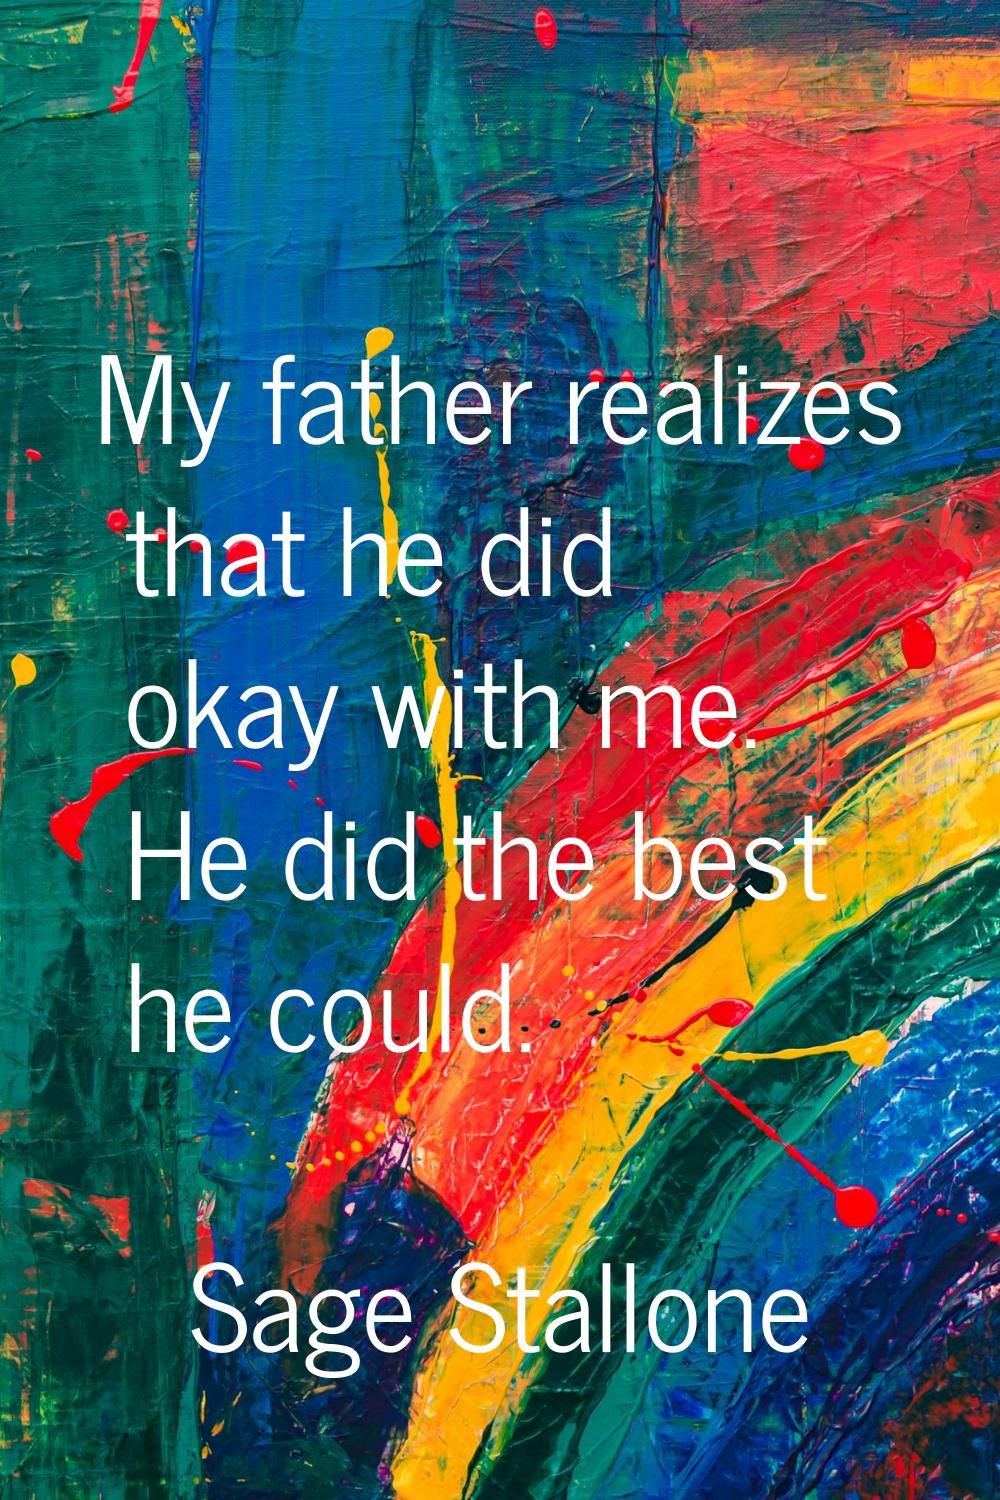 My father realizes that he did okay with me. He did the best he could.